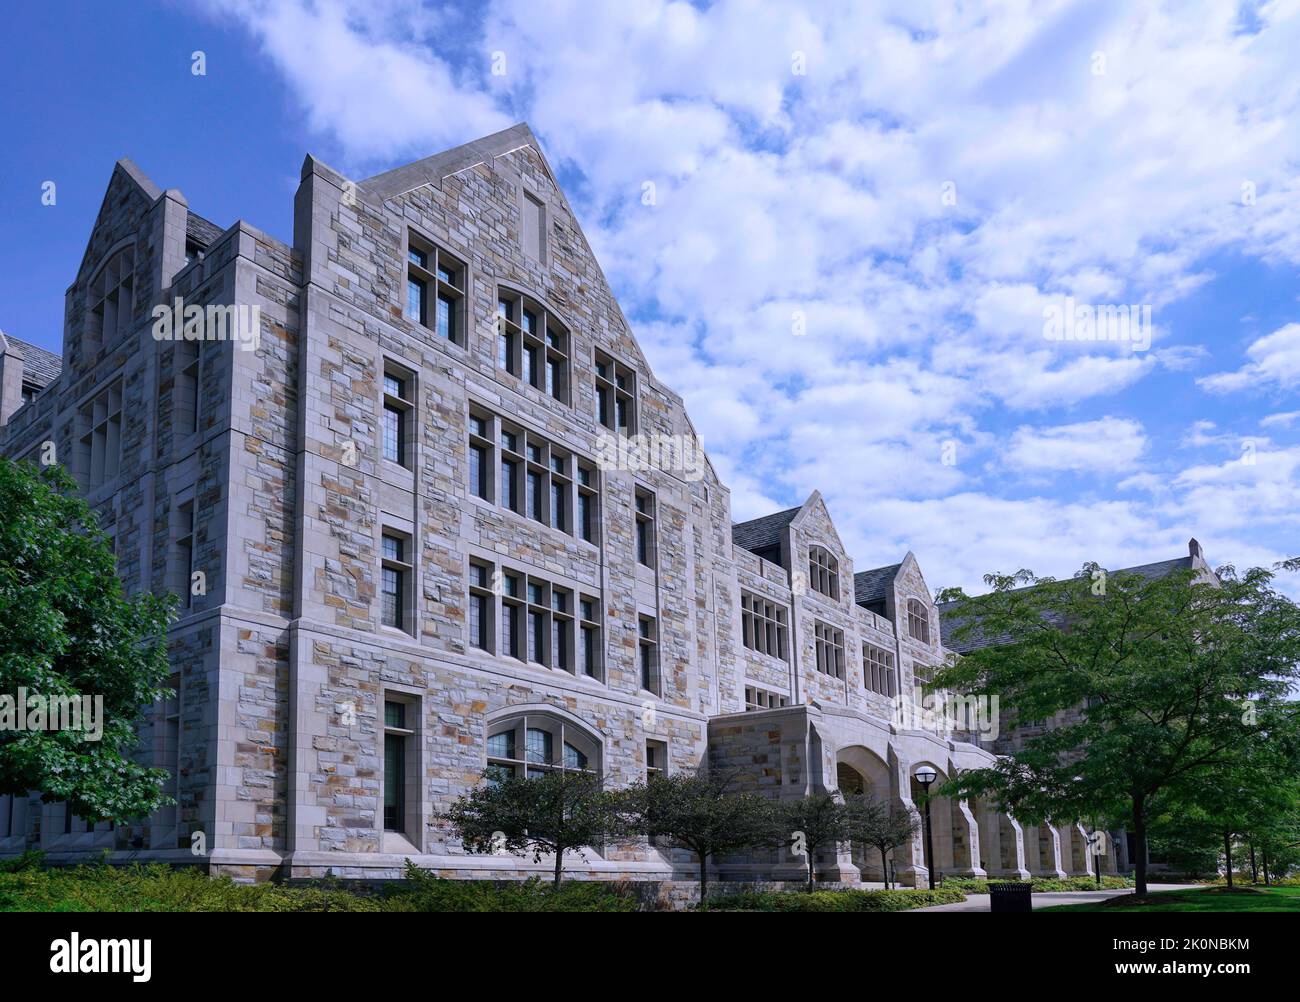 Modern stone university building influenced by gothic architecture Stock Photo